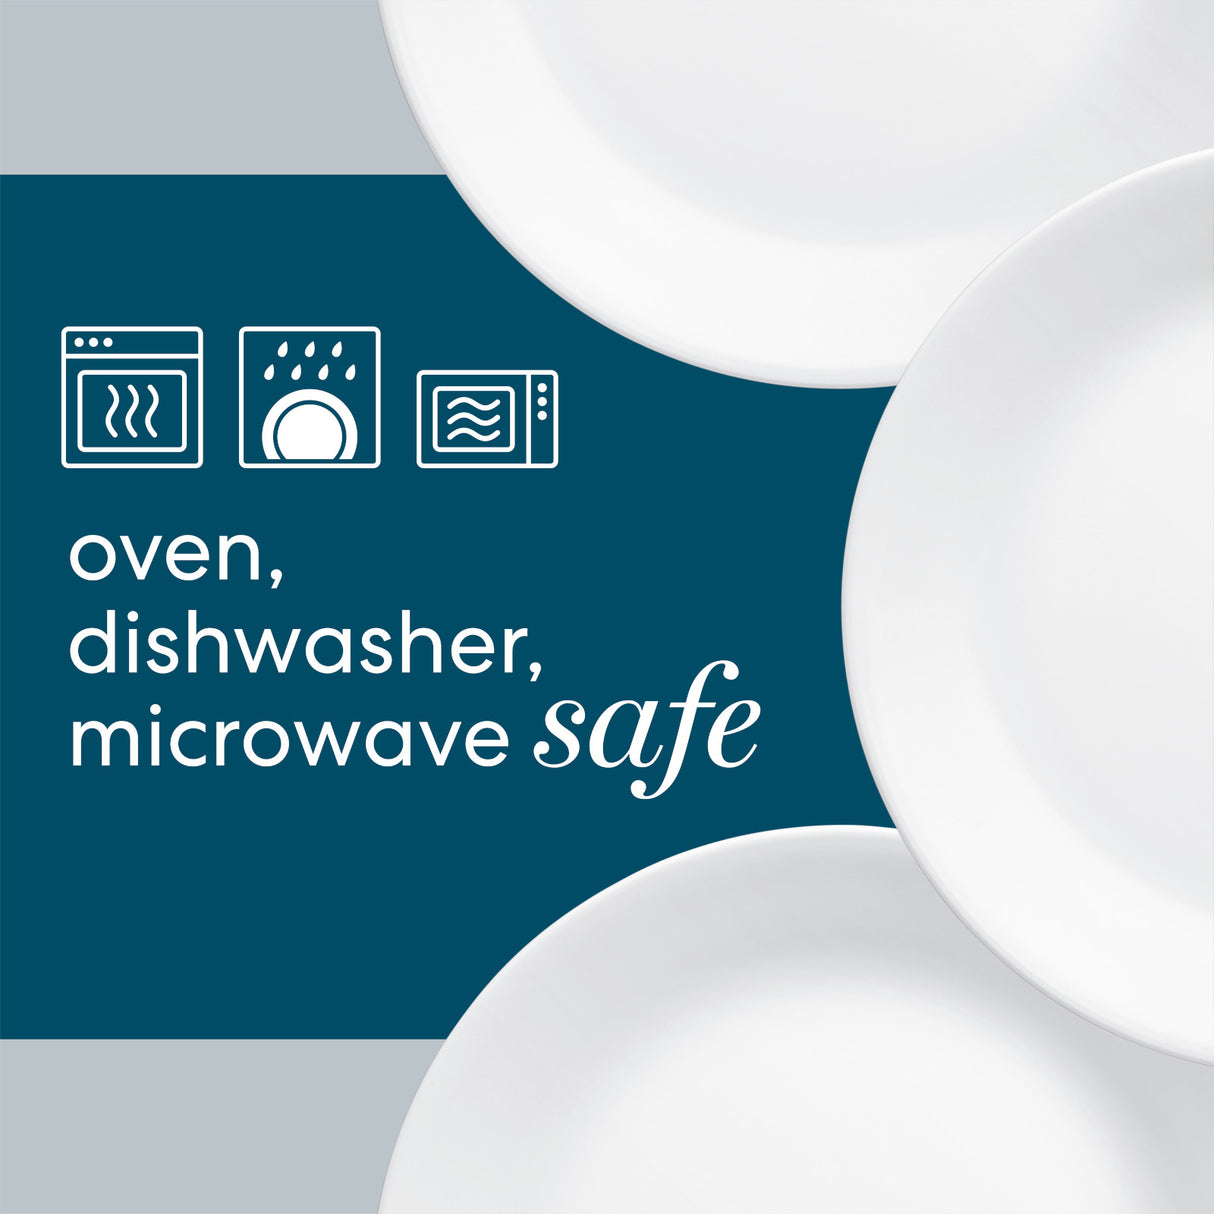 text oven, dishwasher, microwave safe